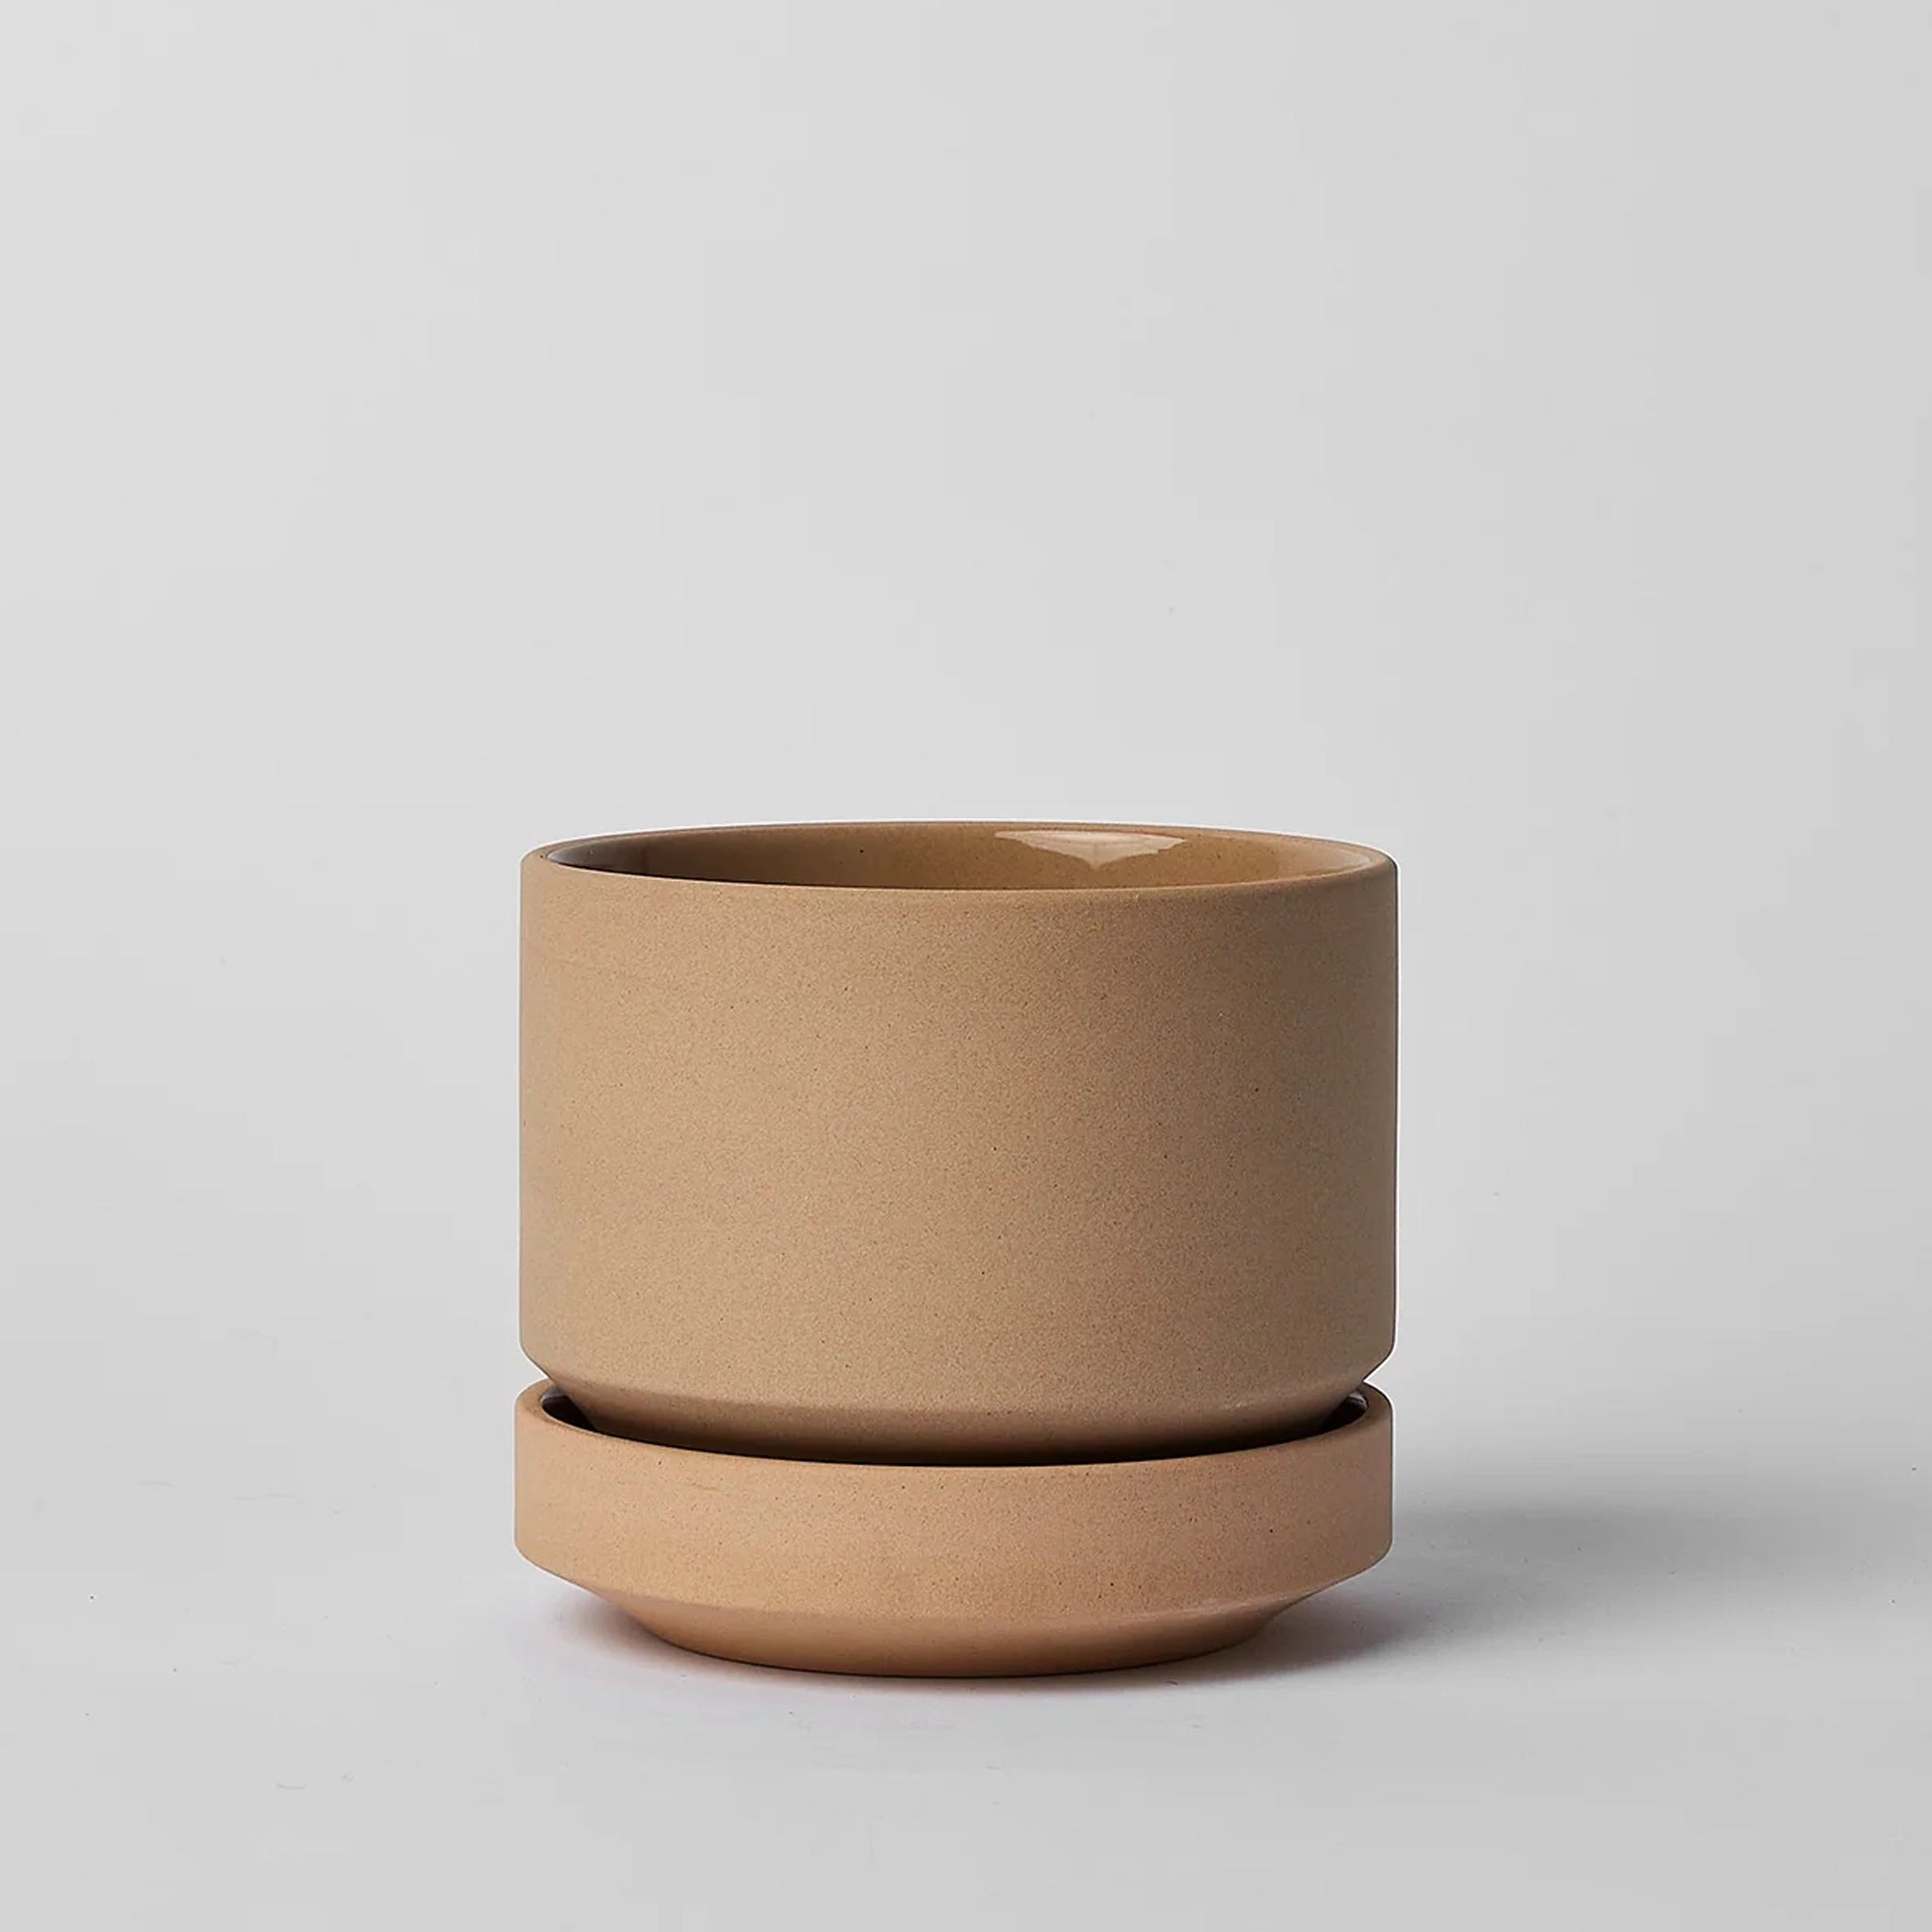 On a neutral background is a tan ceramic planter with a thick removable tray for watering. 